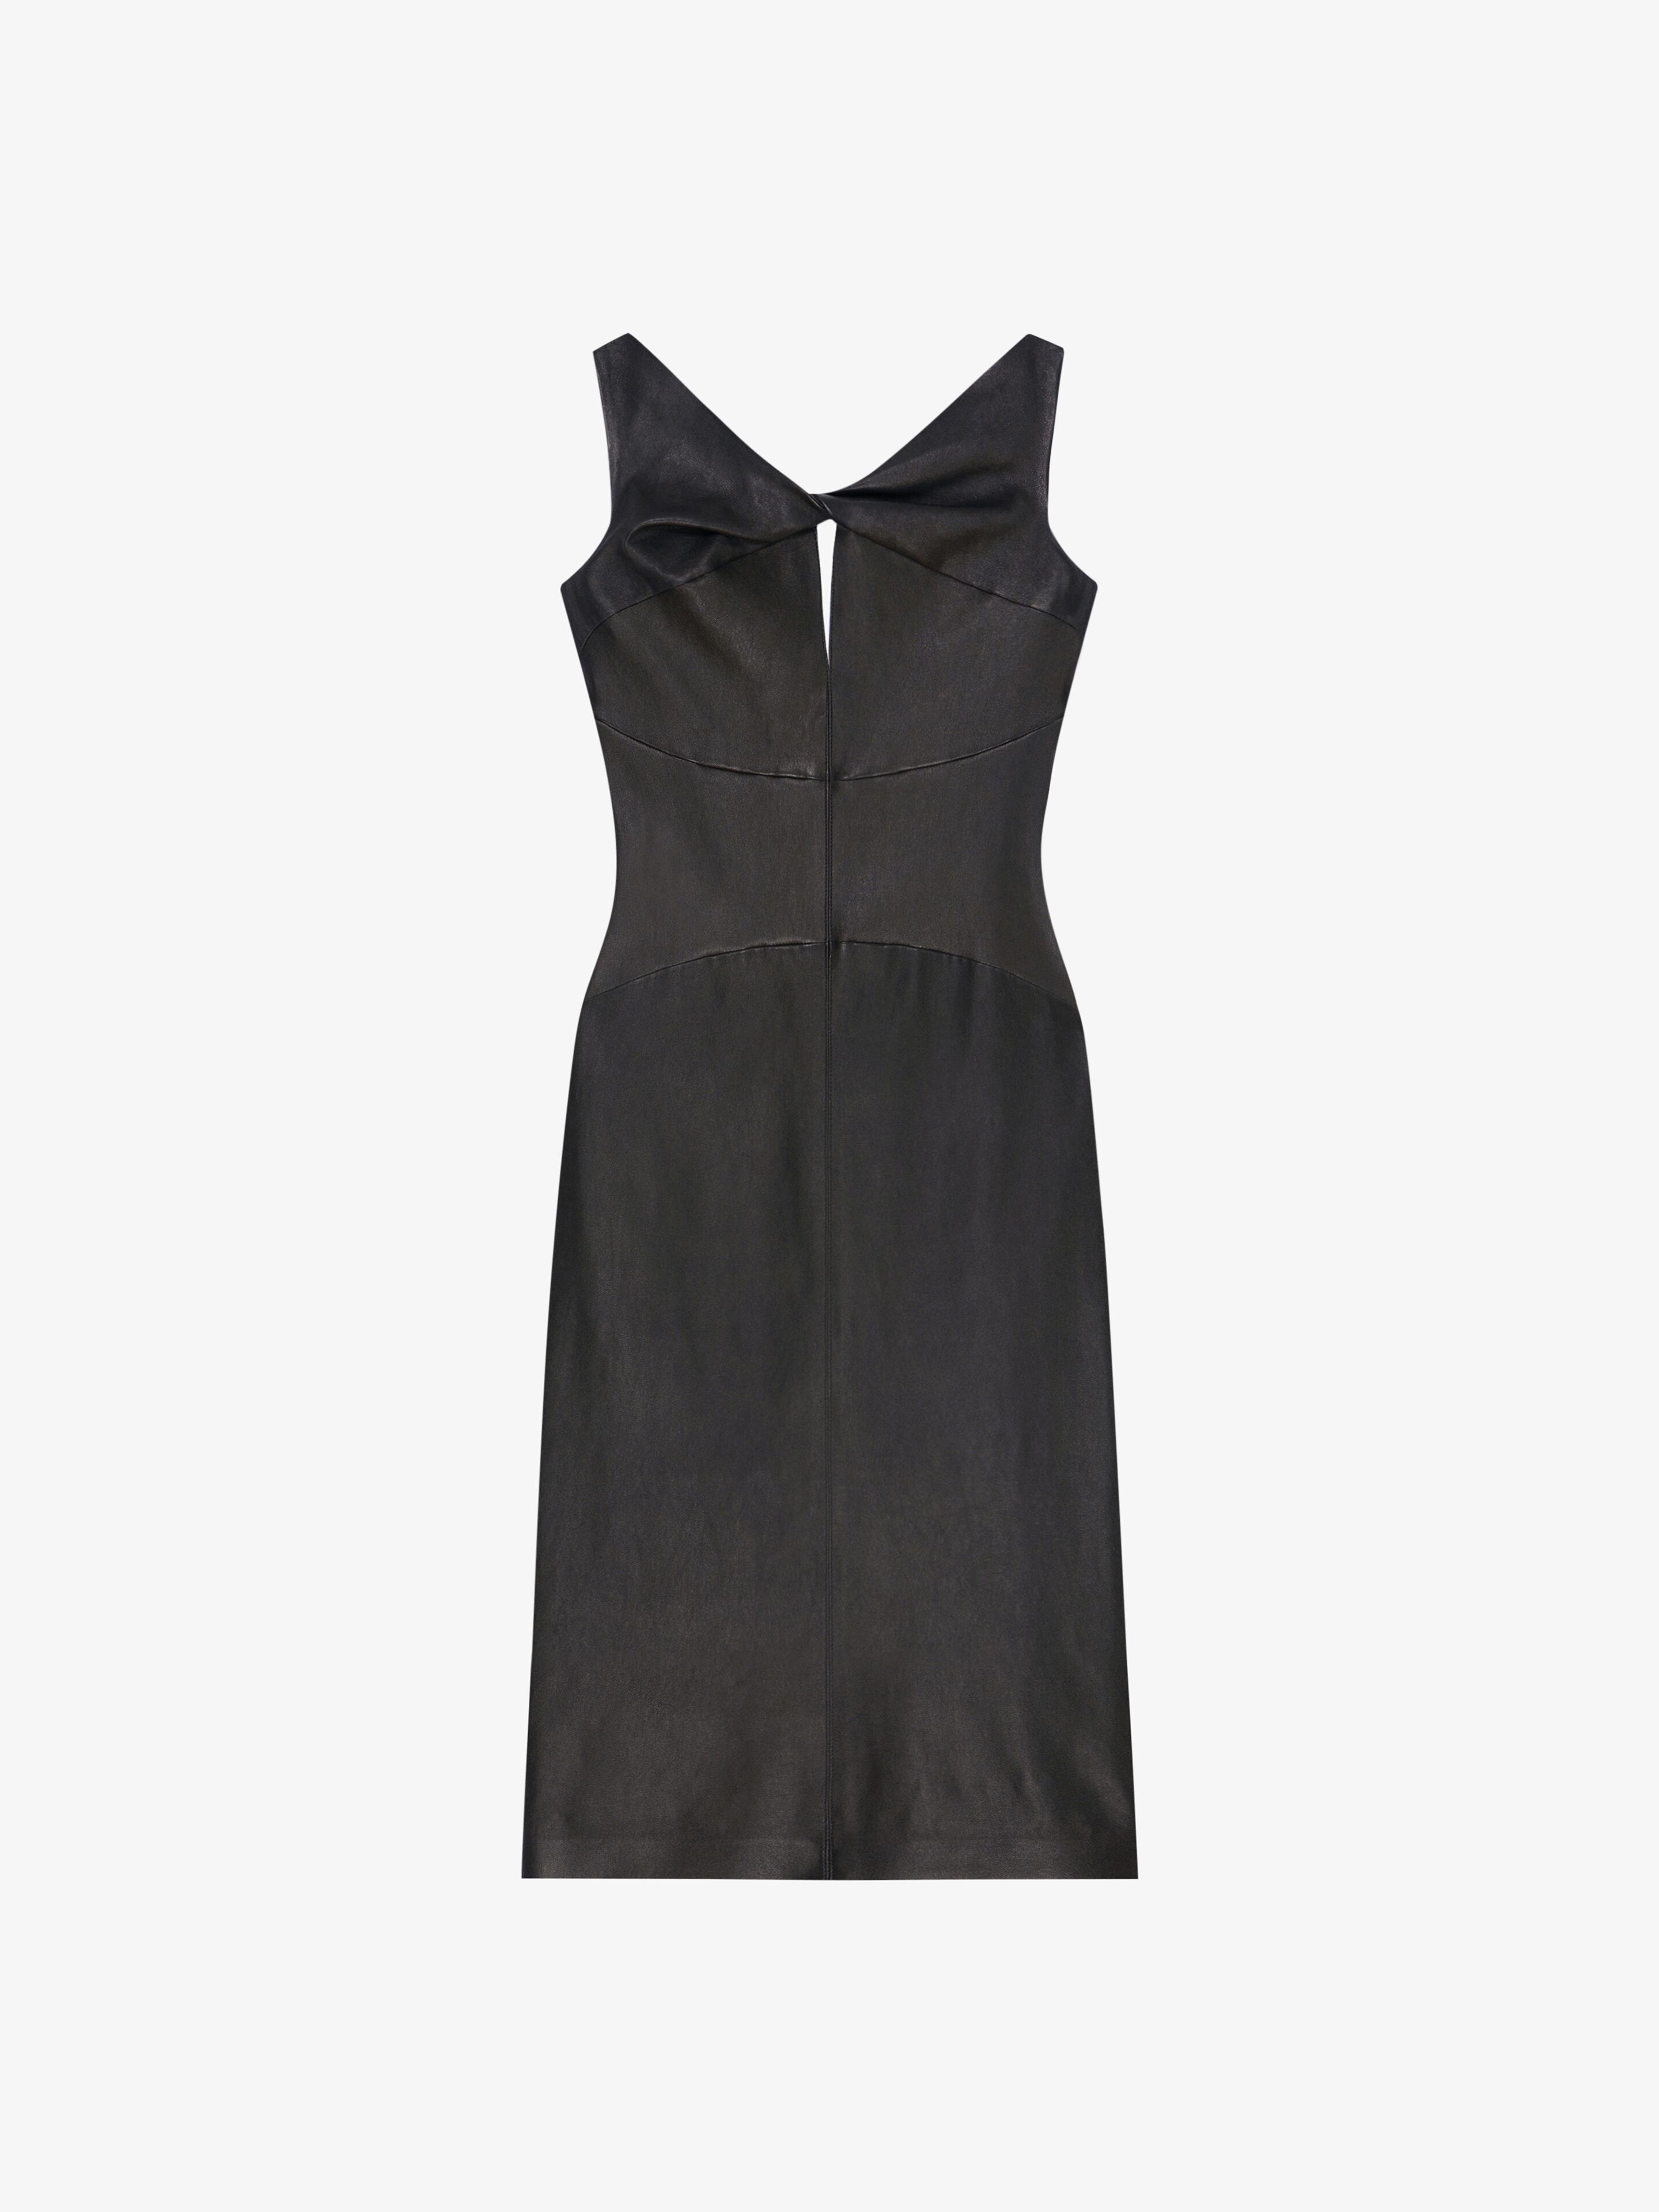 Givenchy Women's Dress In Leather With Chain Detail In Black